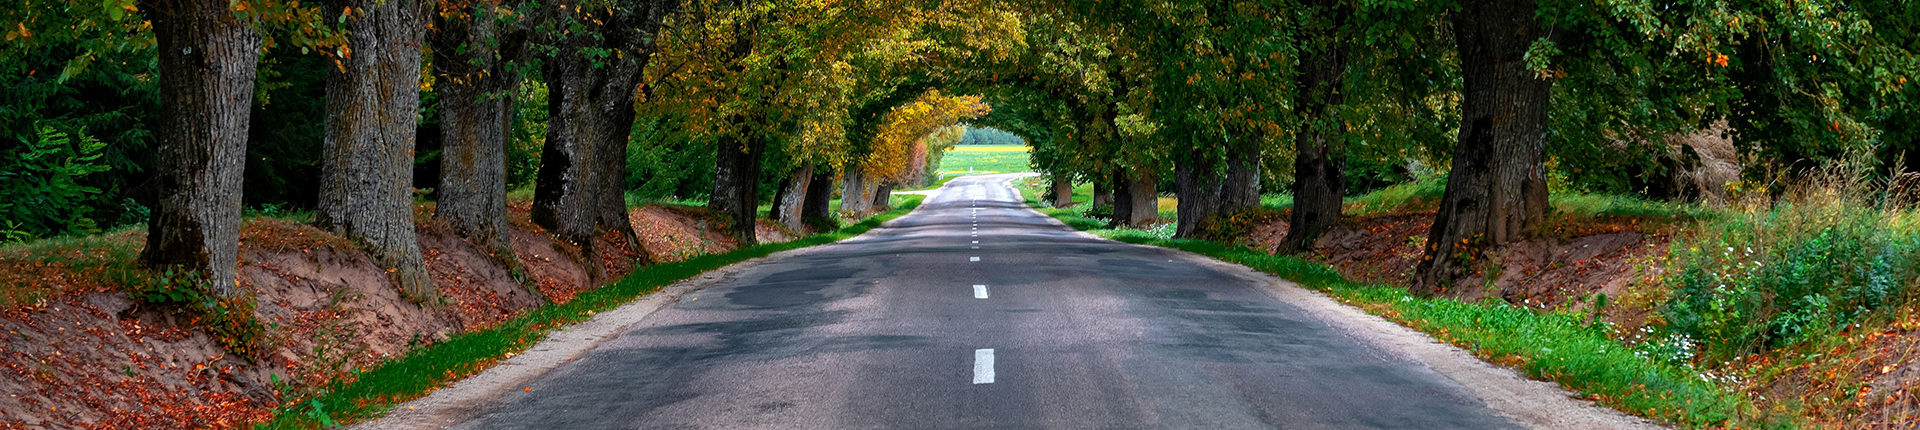 An empty road through a tunnel of trees, extending into the horizon